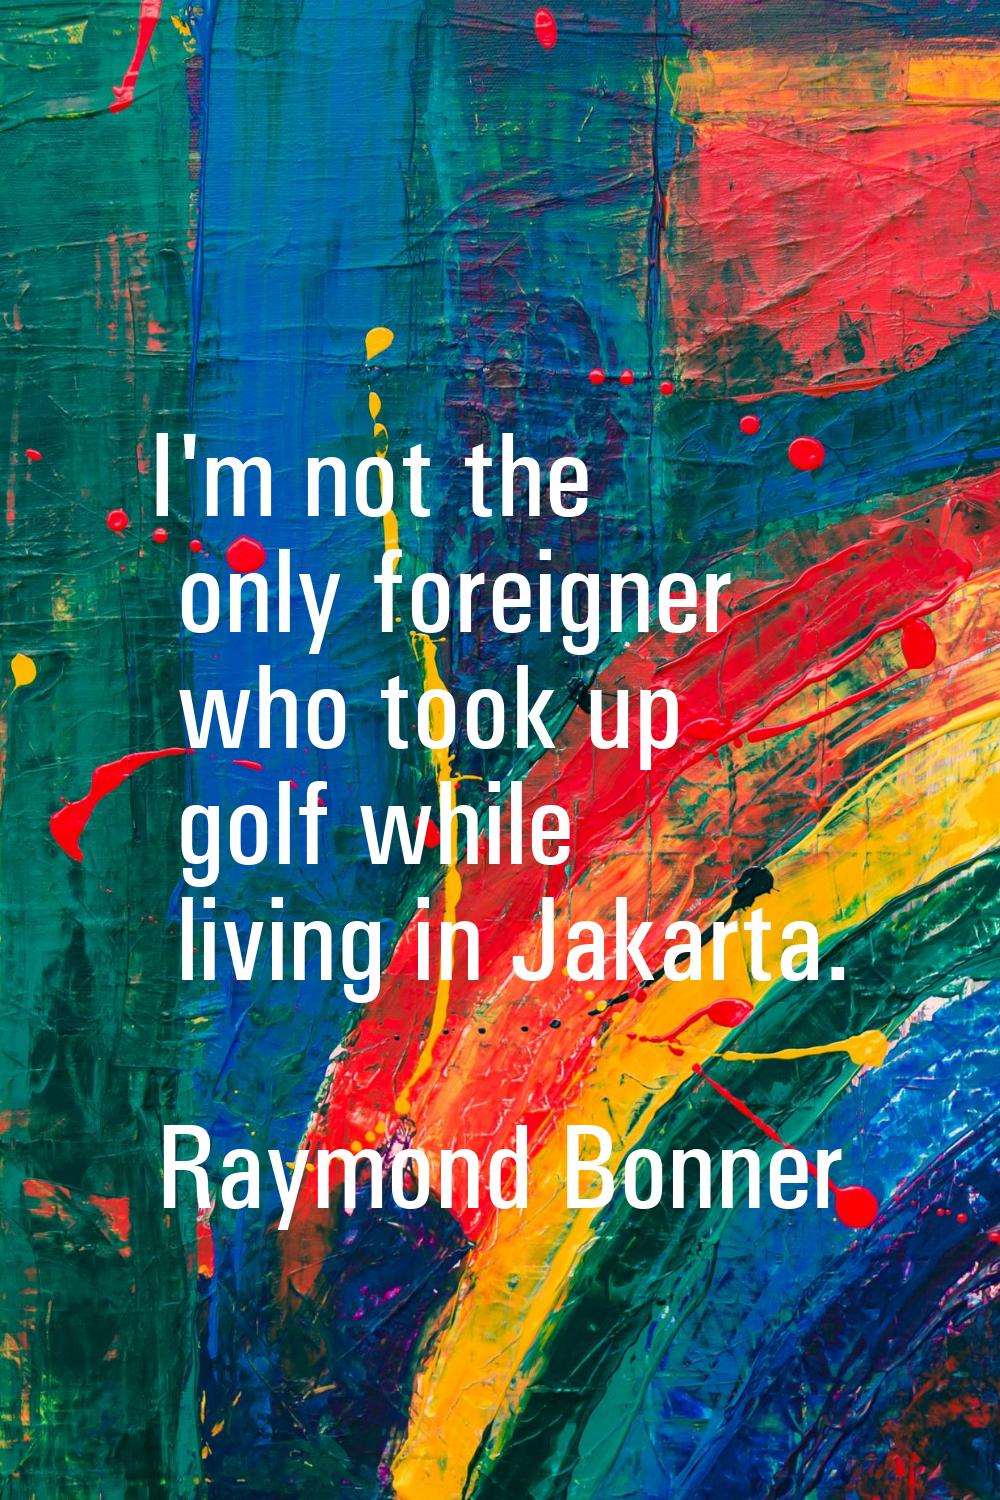 I'm not the only foreigner who took up golf while living in Jakarta.